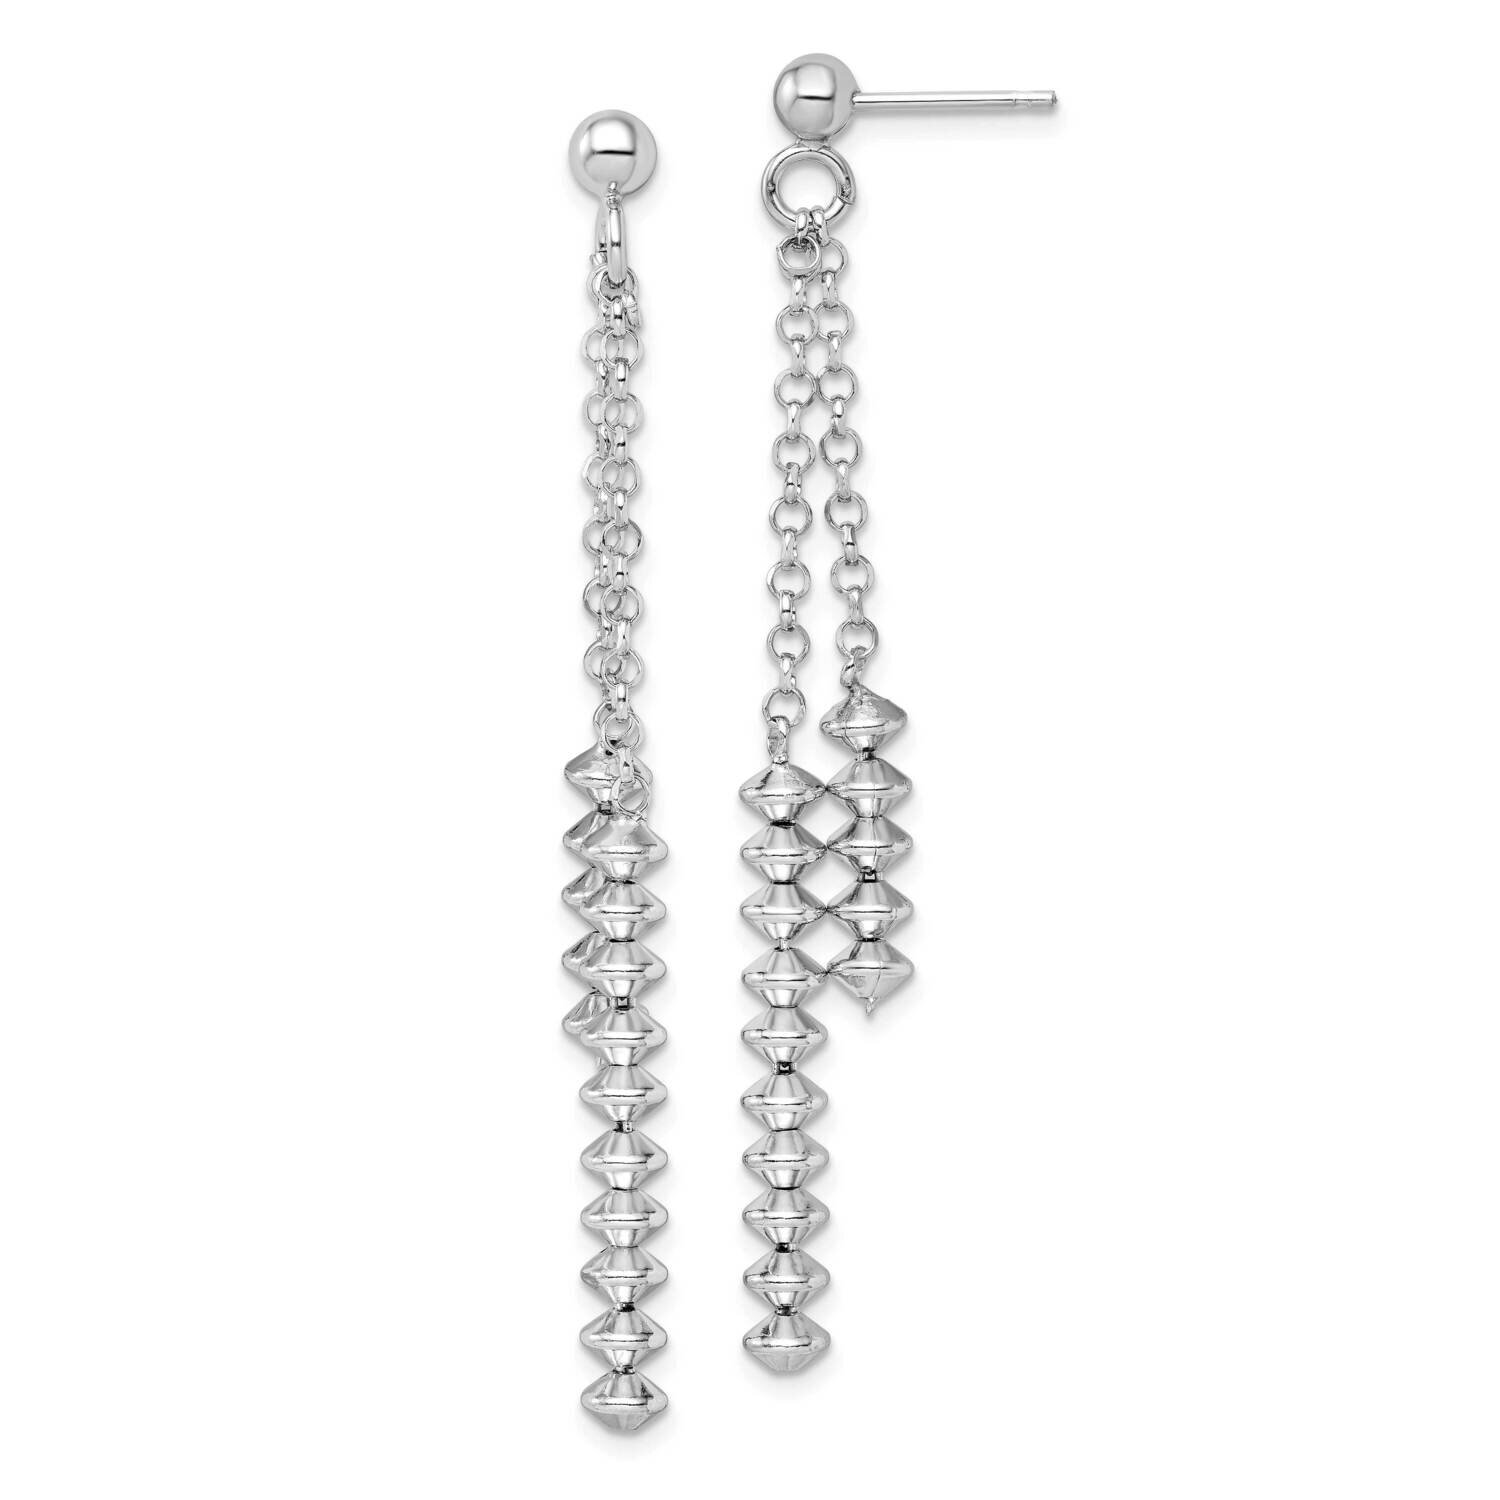 Beaded Post Dangle Earrings Sterling Silver Rhodium-Plated Polished QE15631